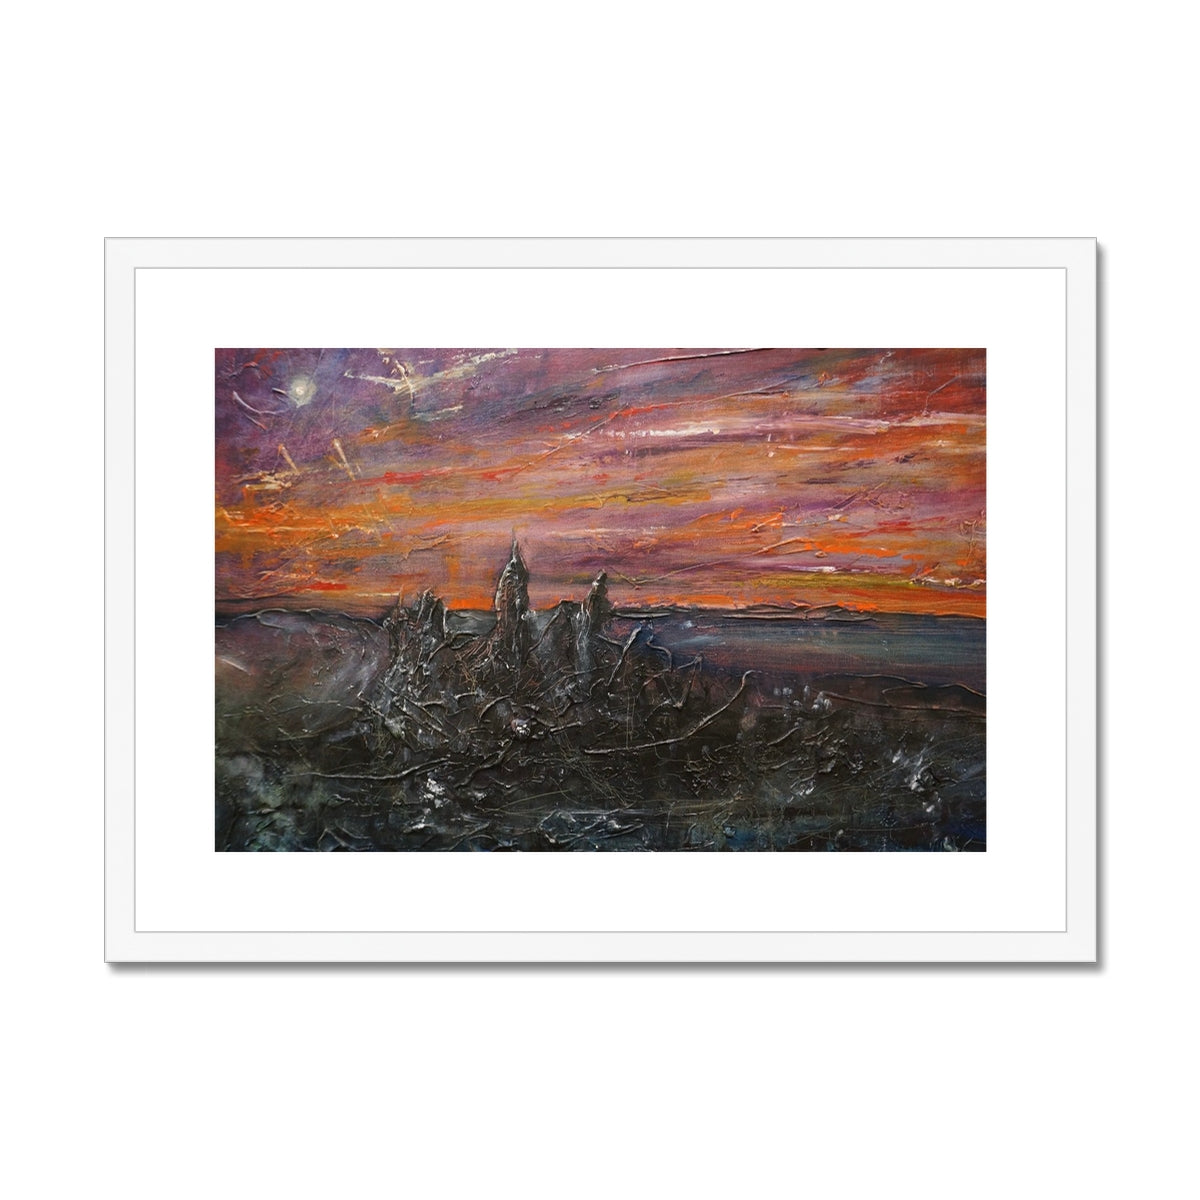 Storr Moonlight Skye Painting | Framed & Mounted Prints From Scotland-Framed & Mounted Prints-Skye Art Gallery-A2 Landscape-White Frame-Paintings, Prints, Homeware, Art Gifts From Scotland By Scottish Artist Kevin Hunter